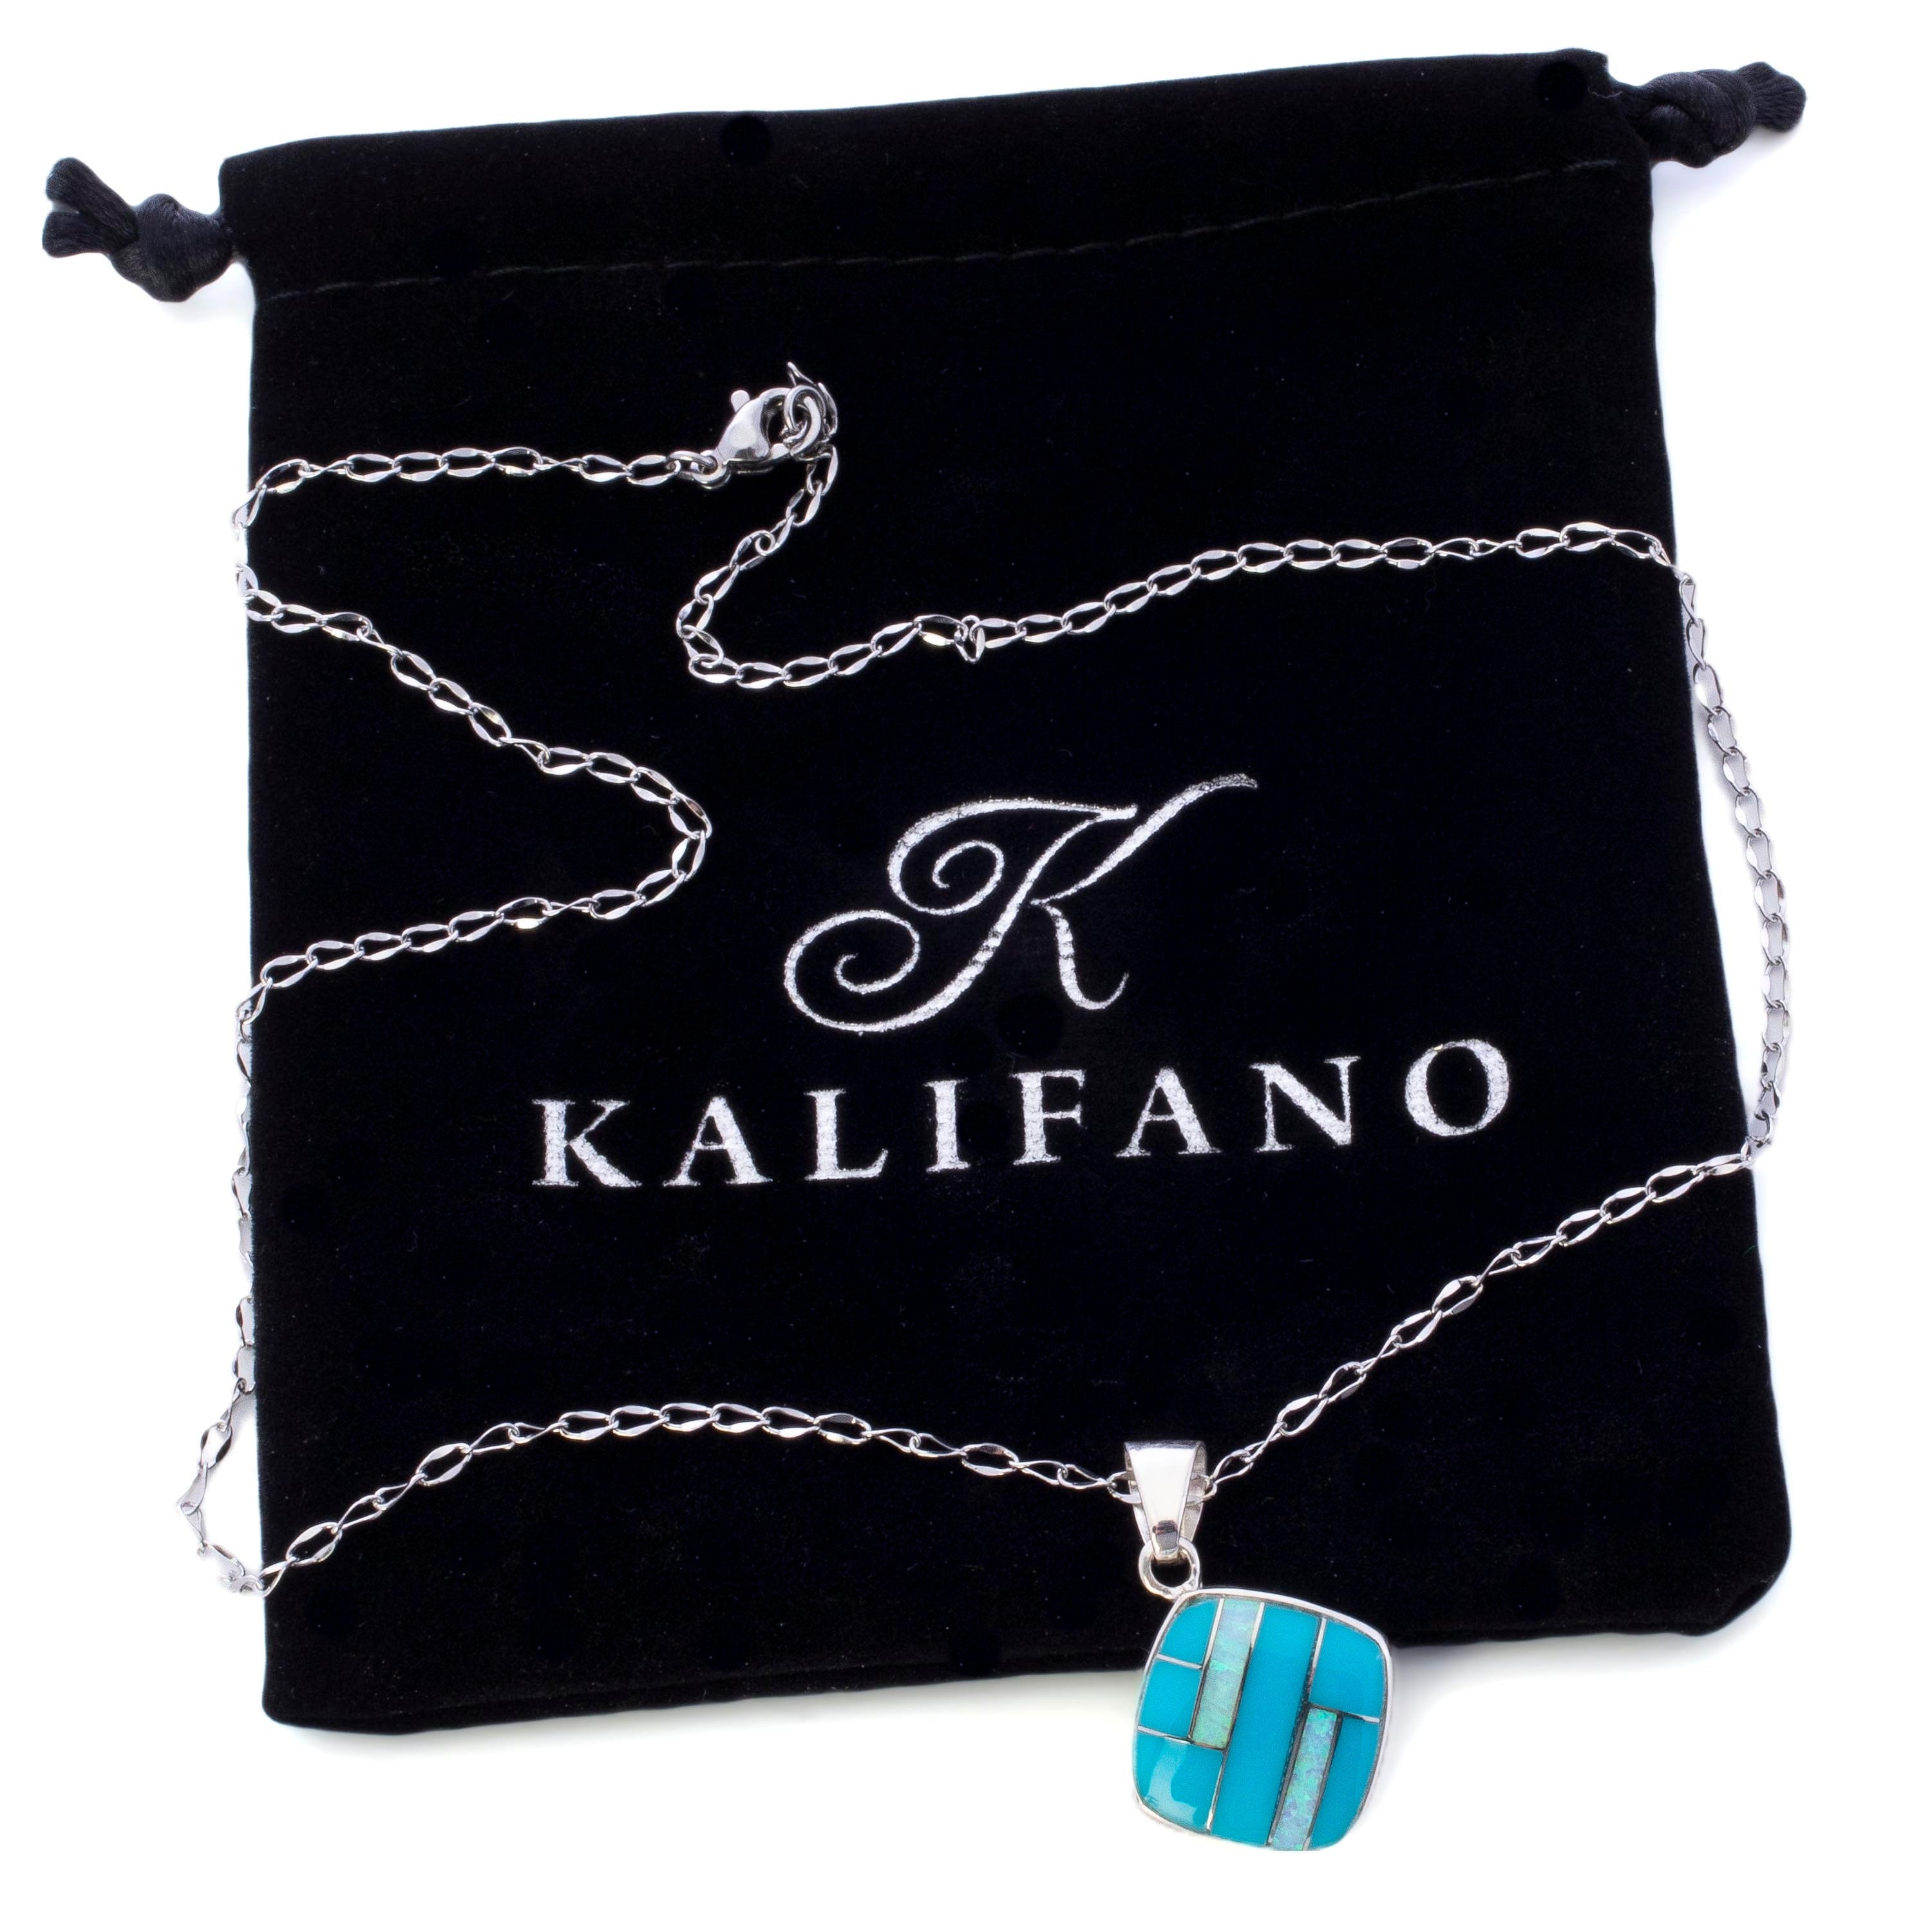 Kalifano Southwest Silver Jewelry Turquoise 925 Sterling Silver Pendant USA Handmade with Opal Accent NMN.2241.TQ